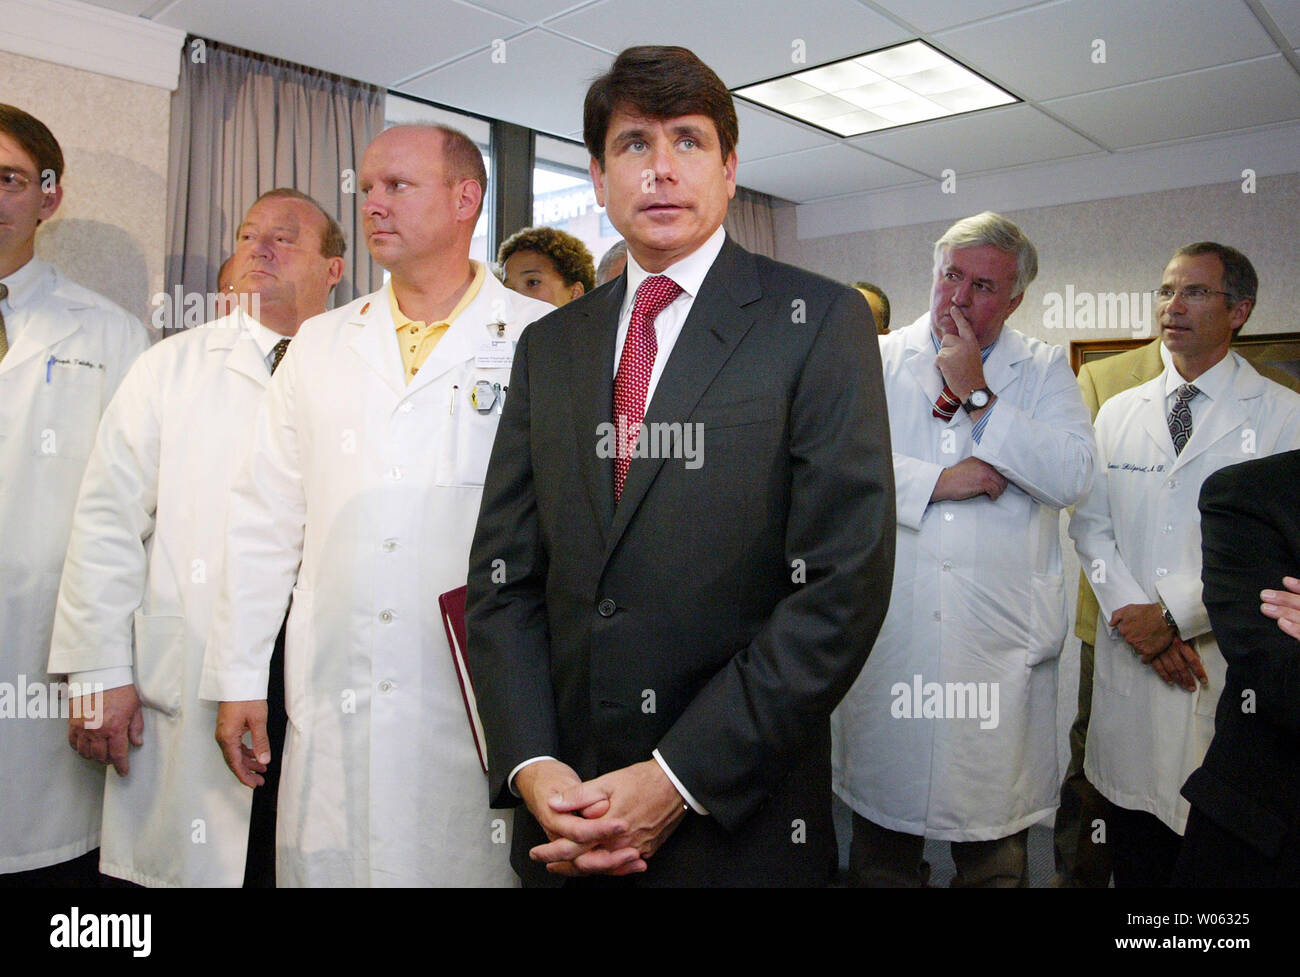 Illinois Gov. Rod Blagojevich stands witrh area doctors before signing medical malpractice reform at St. Anthony's Hospital in Alton, IL on August 25, 2005. In an effort to imporve access to health care, the new law caps monetary awards for pain and suffering, gives the state the authority to more aggressively regulate malpractice insurance companies premium increases, increases the ability of Illinois regulators to enforce physician practices and finally, allows consumers to learn about previous judgements or complaints against any physician licenced in Illinois. (UPI Photo/Bill Greenblatt) Stock Photo